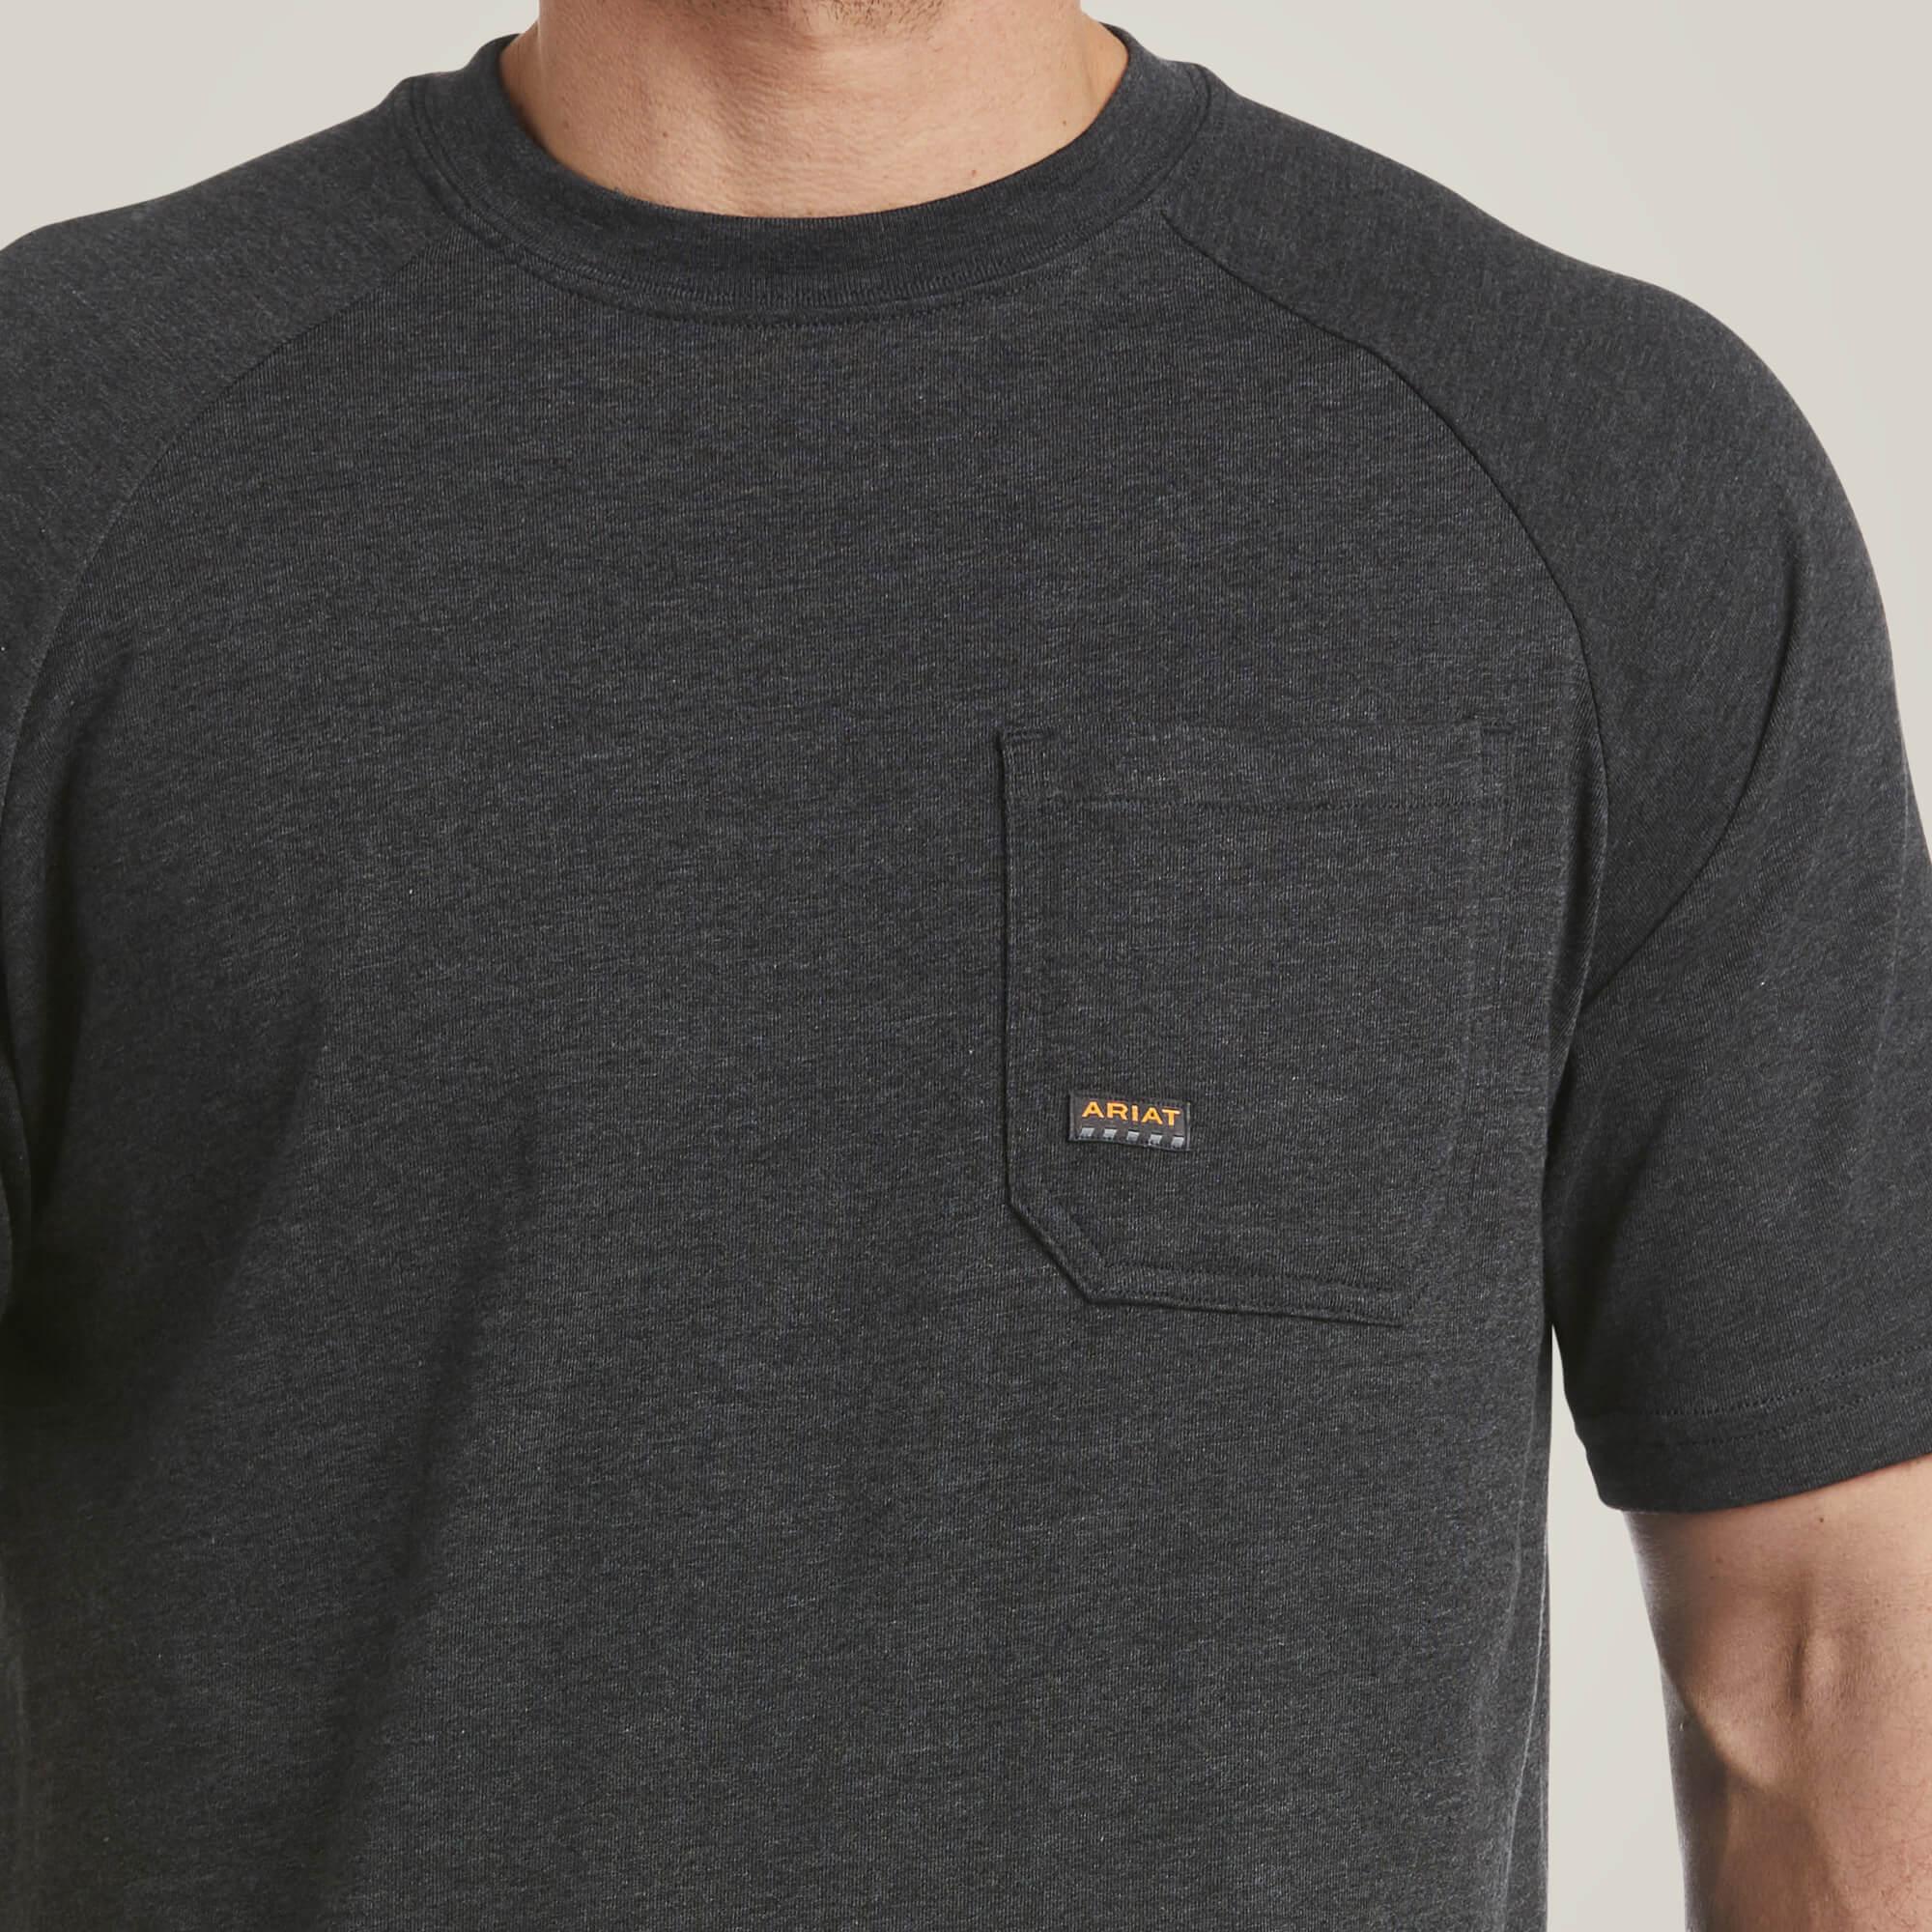 Rebar Cotton Strong T-Shirt - Charcoal Heather - Purpose-Built / Home of the Trades